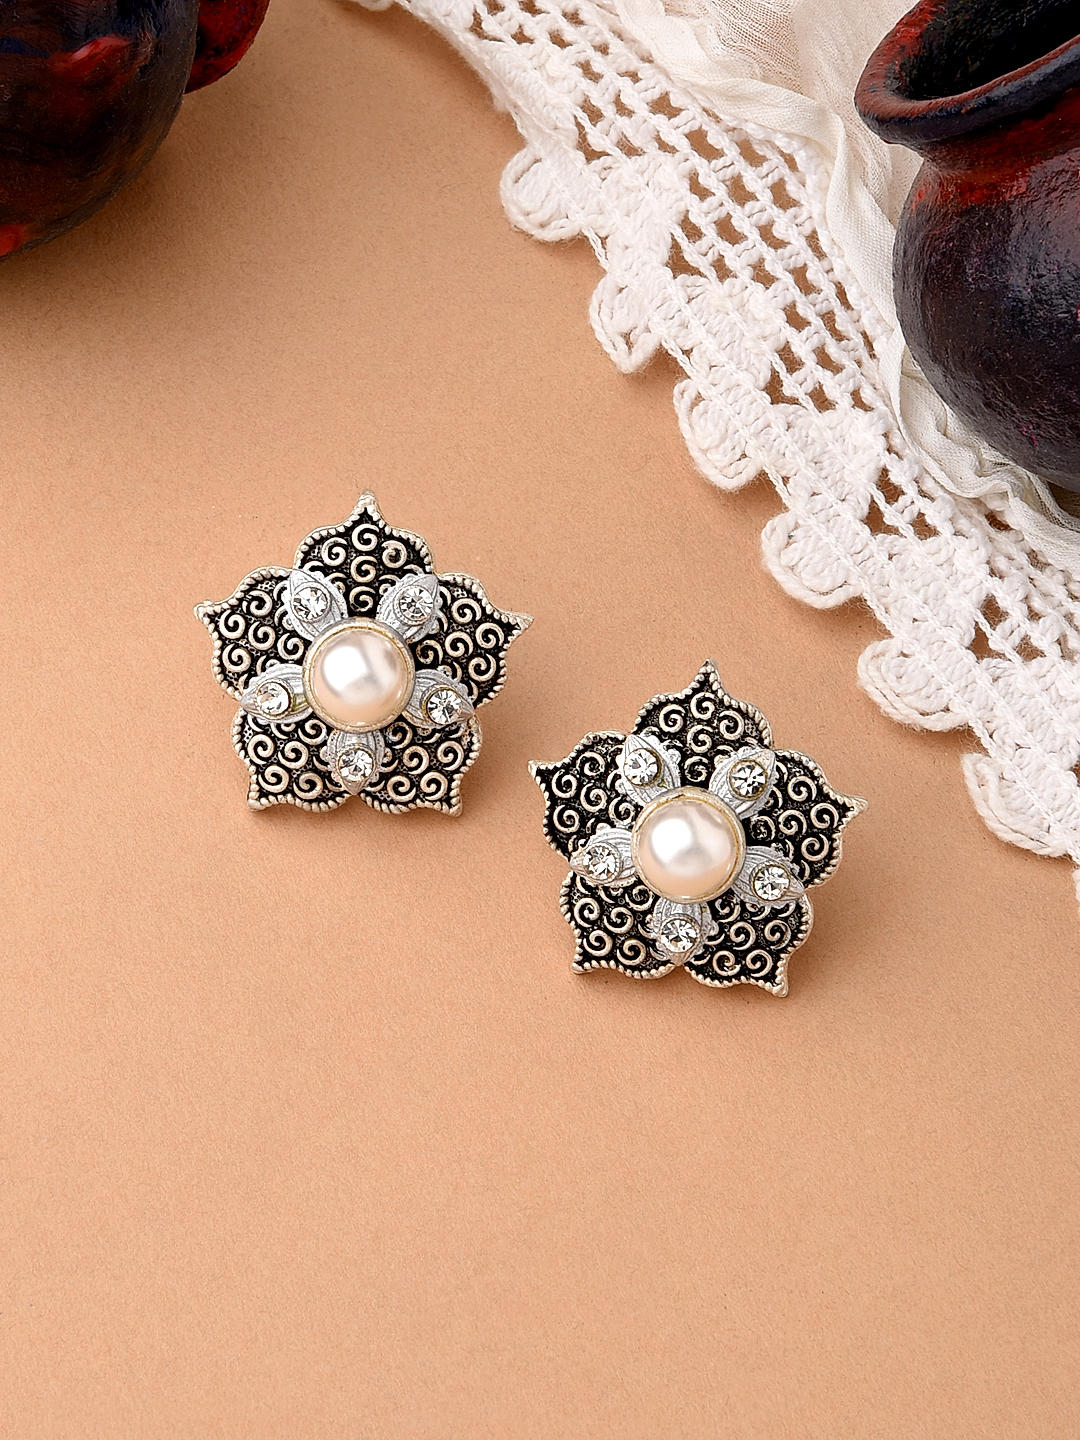 Buy Antique Gold Plated Floral Small Stud Earrings